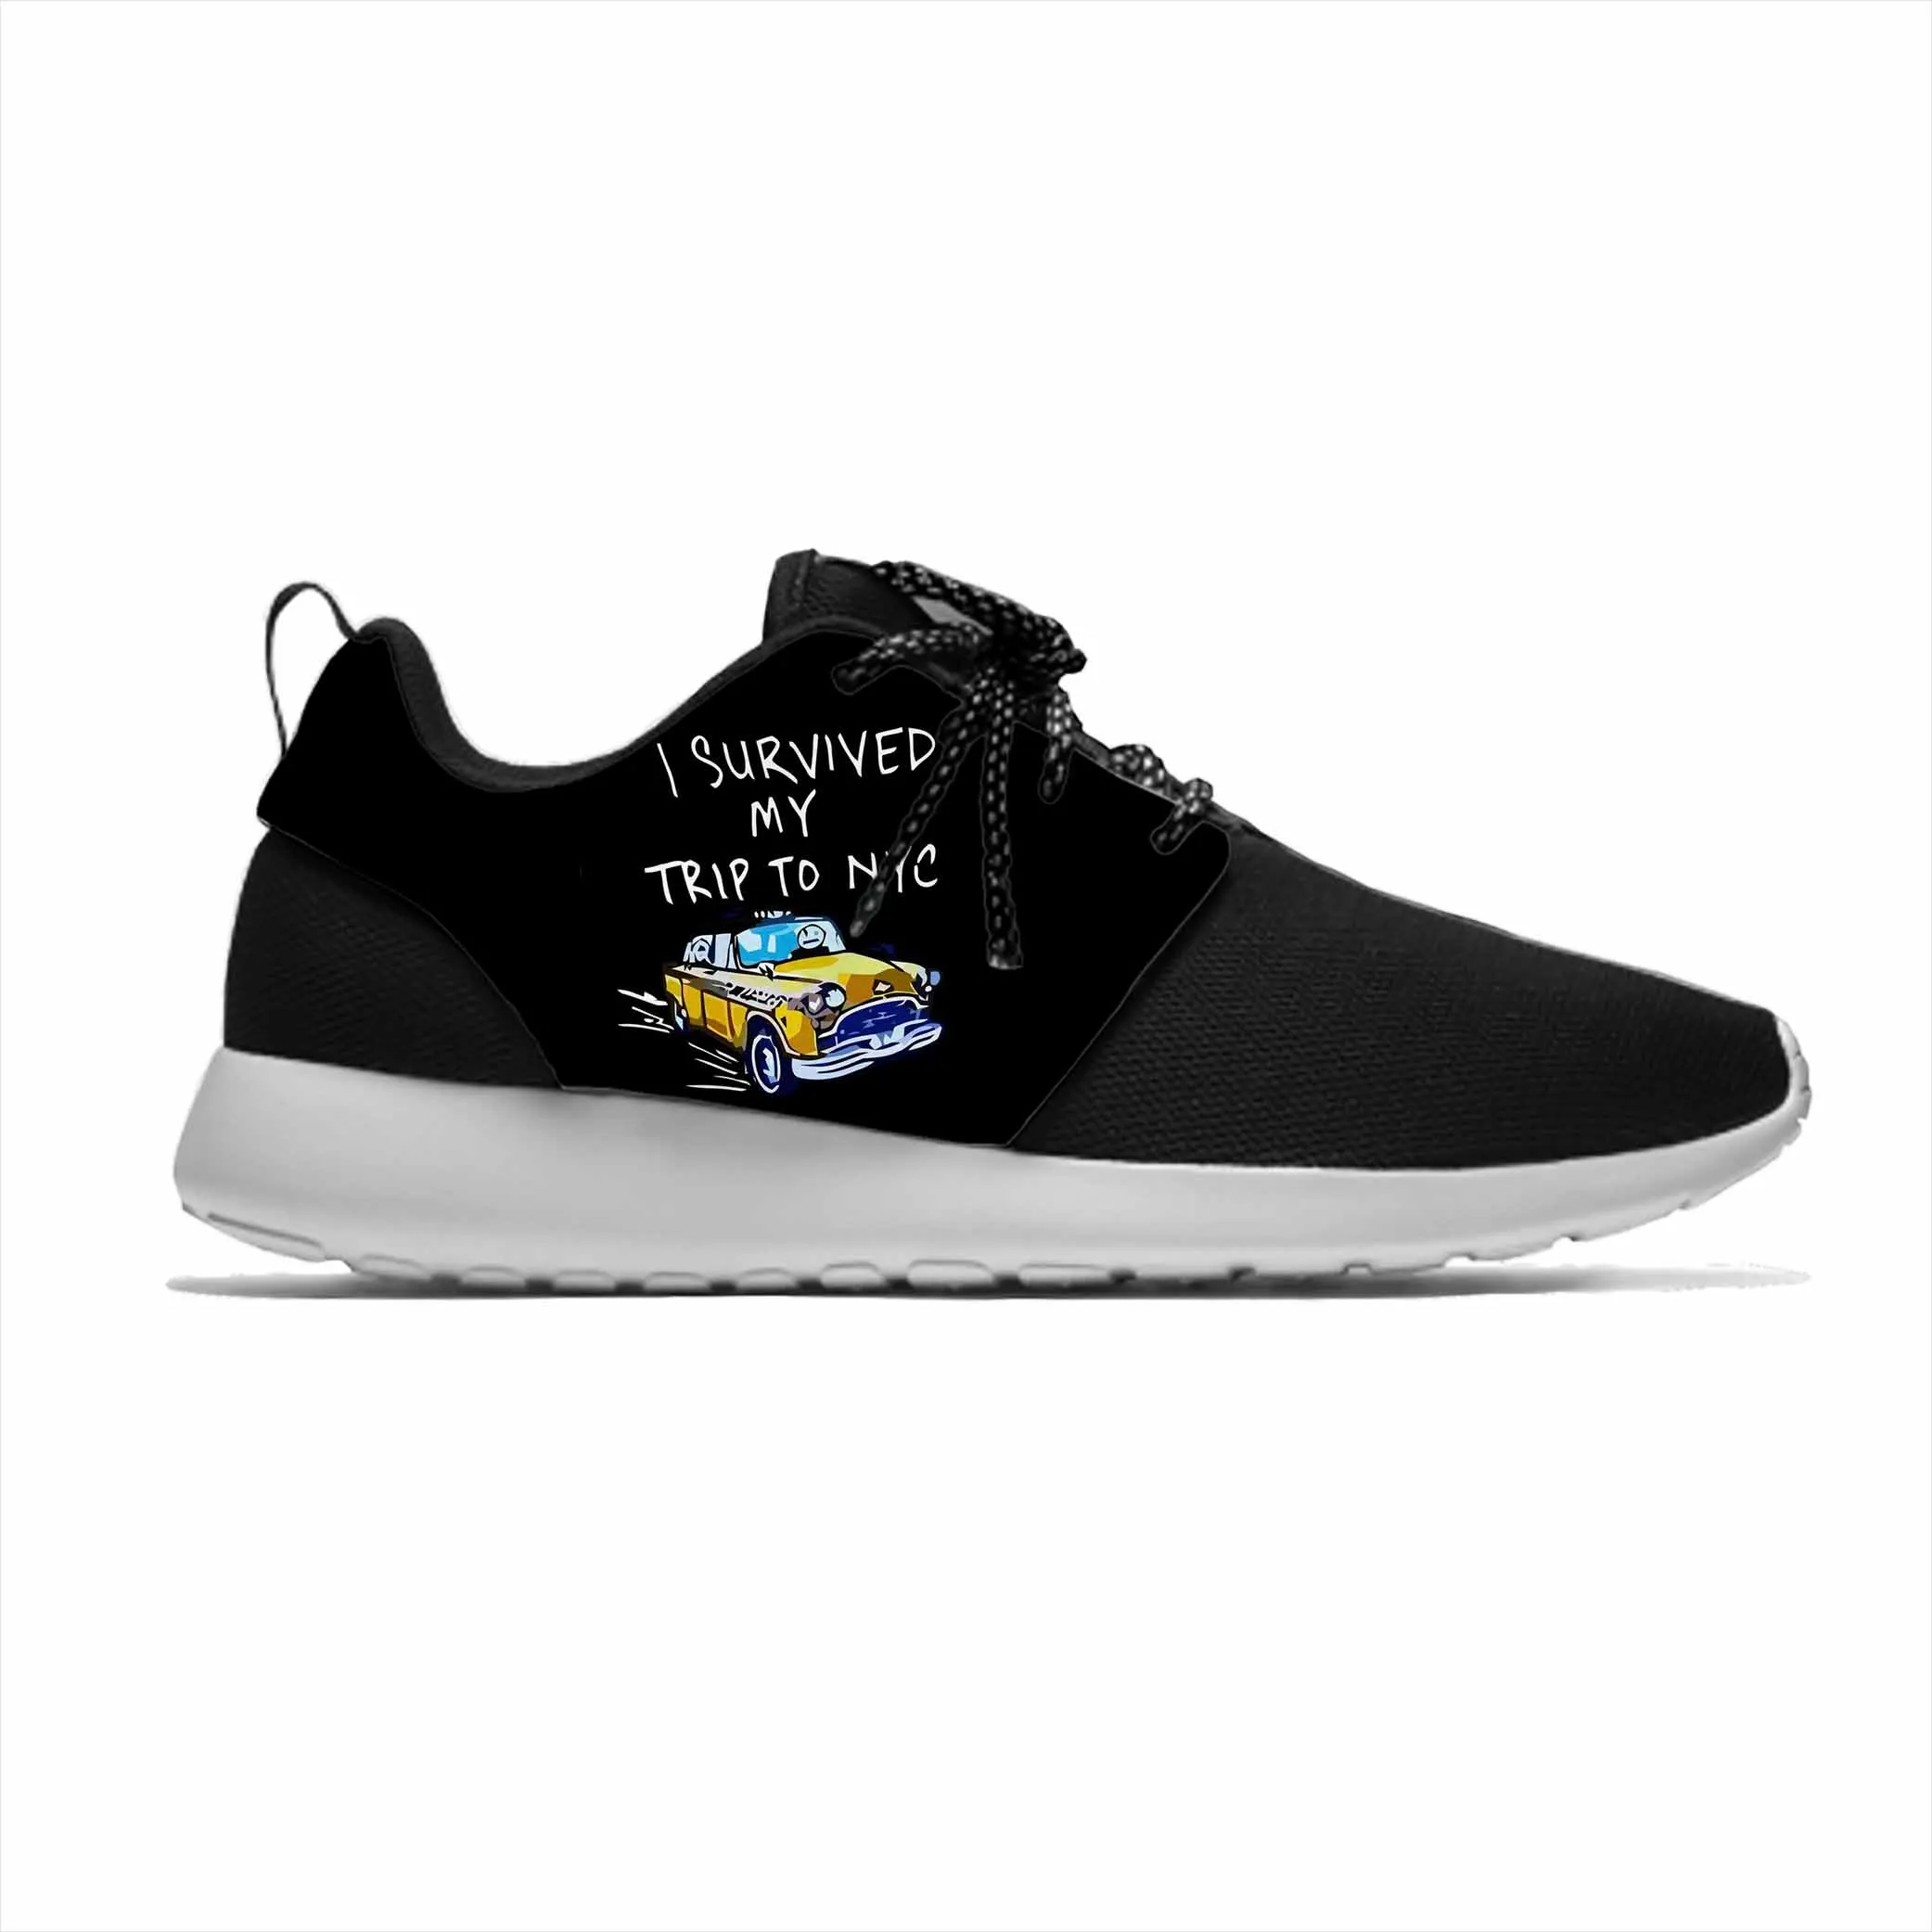 Hot Cartoon Tom Holland I Survived My Trip To NYC Sport Running Shoes Casual Breathable Lightweight 3D Print Men Women Sneakers